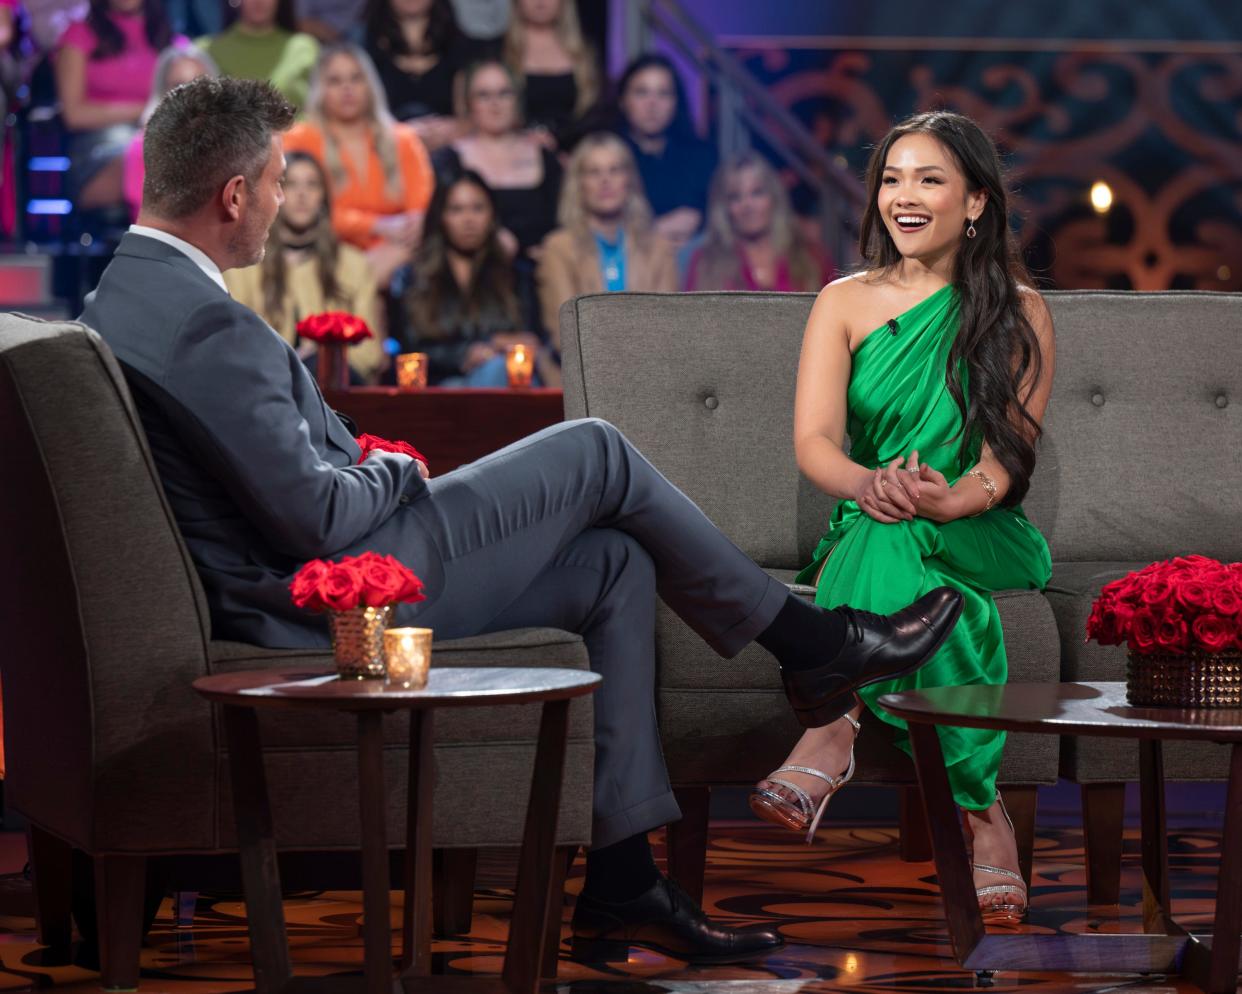 Jenn Tran, who is Vietnamese American and finished in the top six on Joey Graziadei's season of "The Bachelor," will be the next bachelorette.